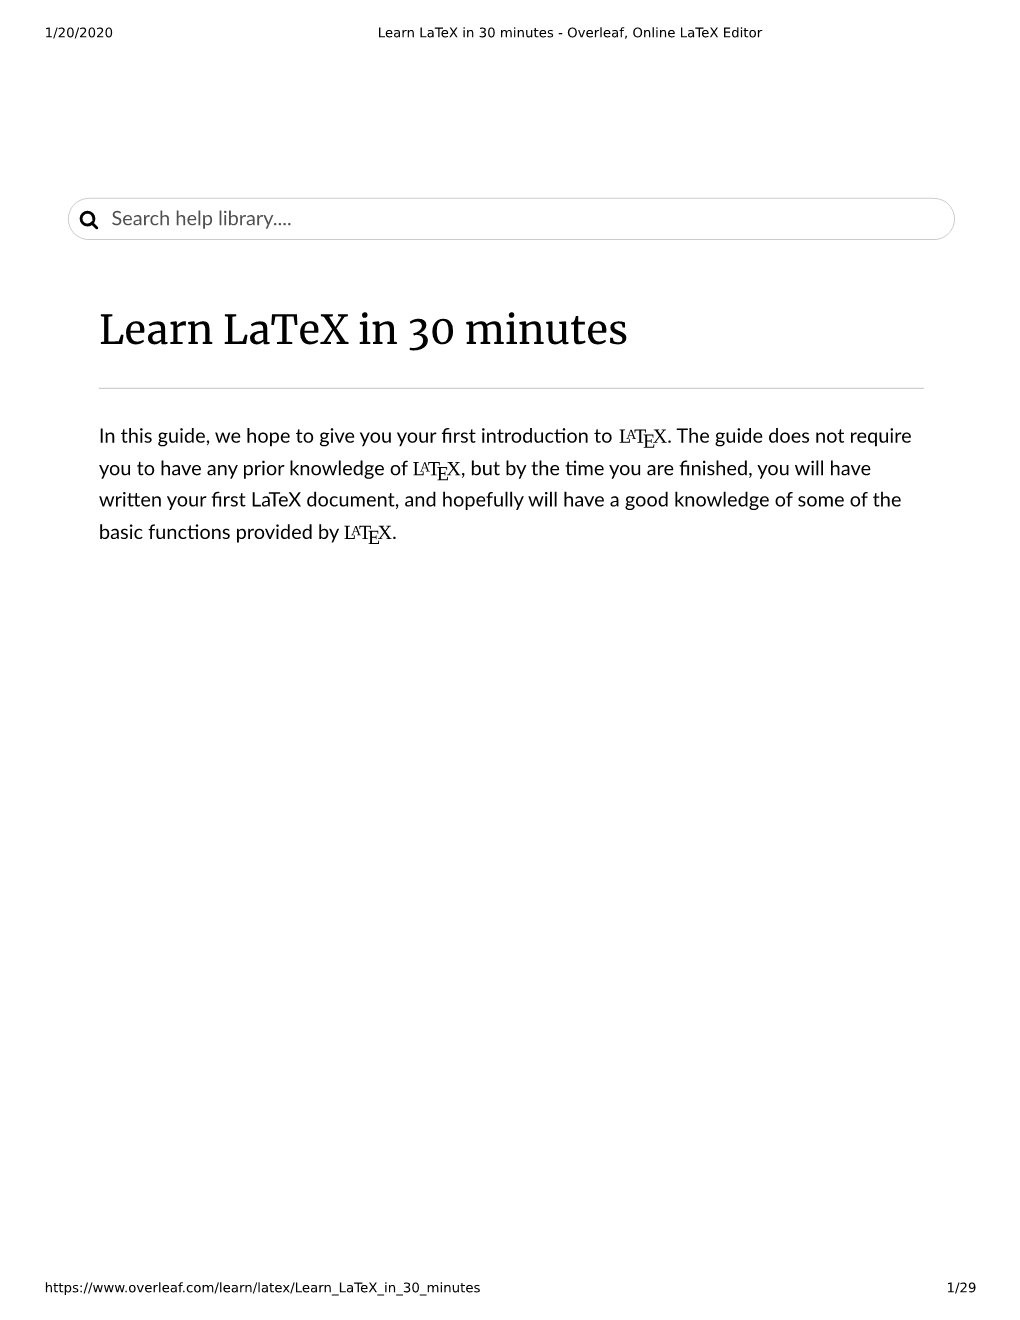 Learn Latex in 30 Minutes - Overleaf, Online Latex Editor